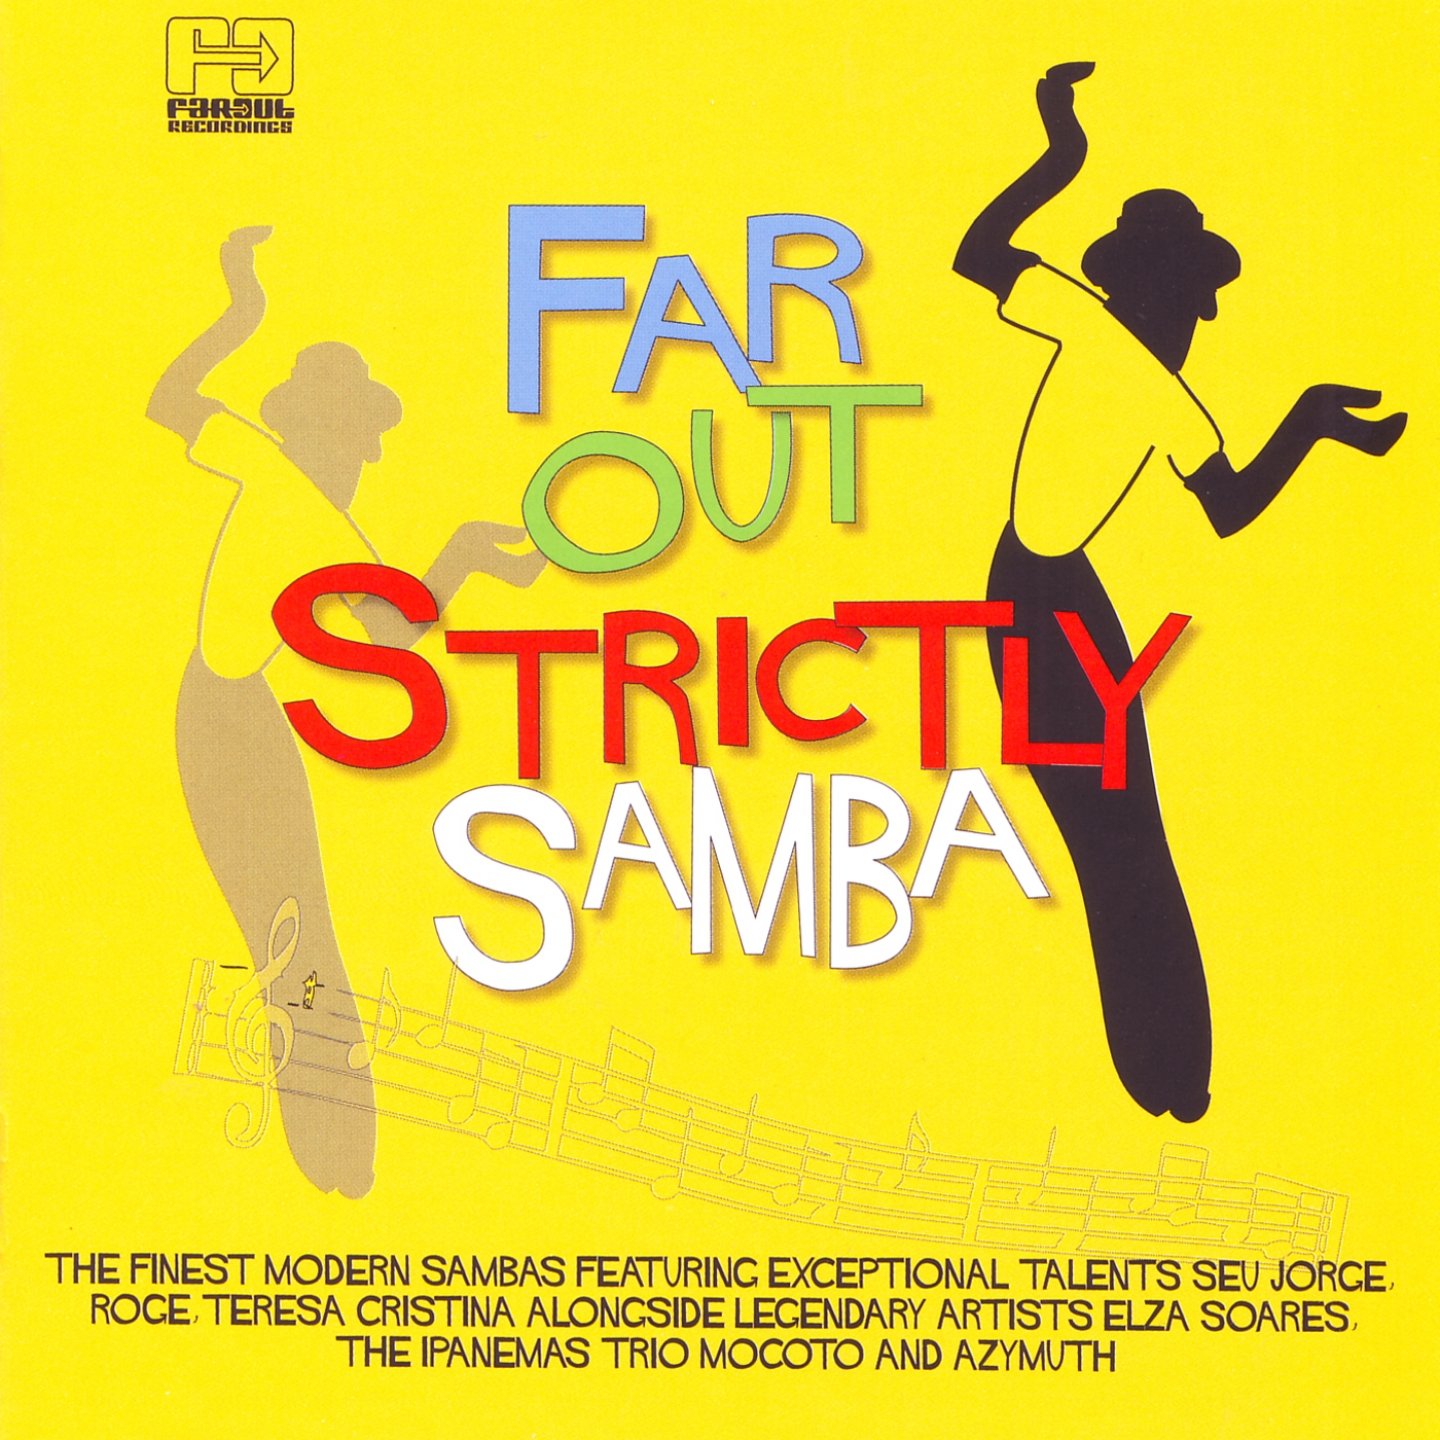 VA-Far Out Strictly Samba-ES-CD-FLAC-2009-THEVOiD